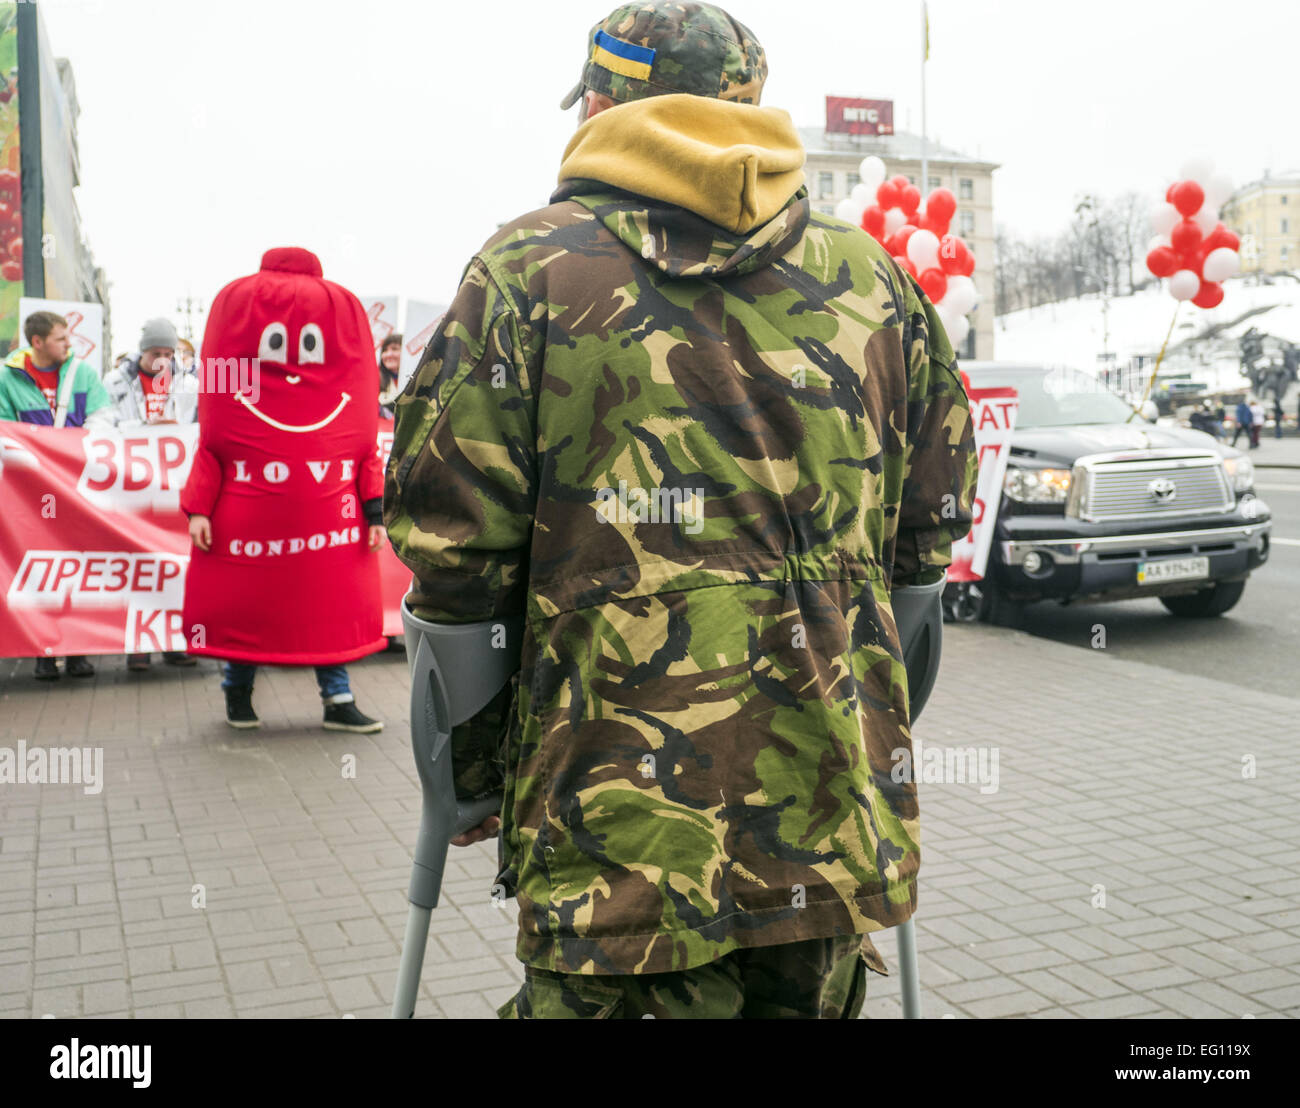 Feb. 13, 2015 - Wounded soldier watches the action in honor of the Condom  Day -- February 13, 2015 in Kiev, Ukraine, celebrated the Day of the condom.  By the symbolic action